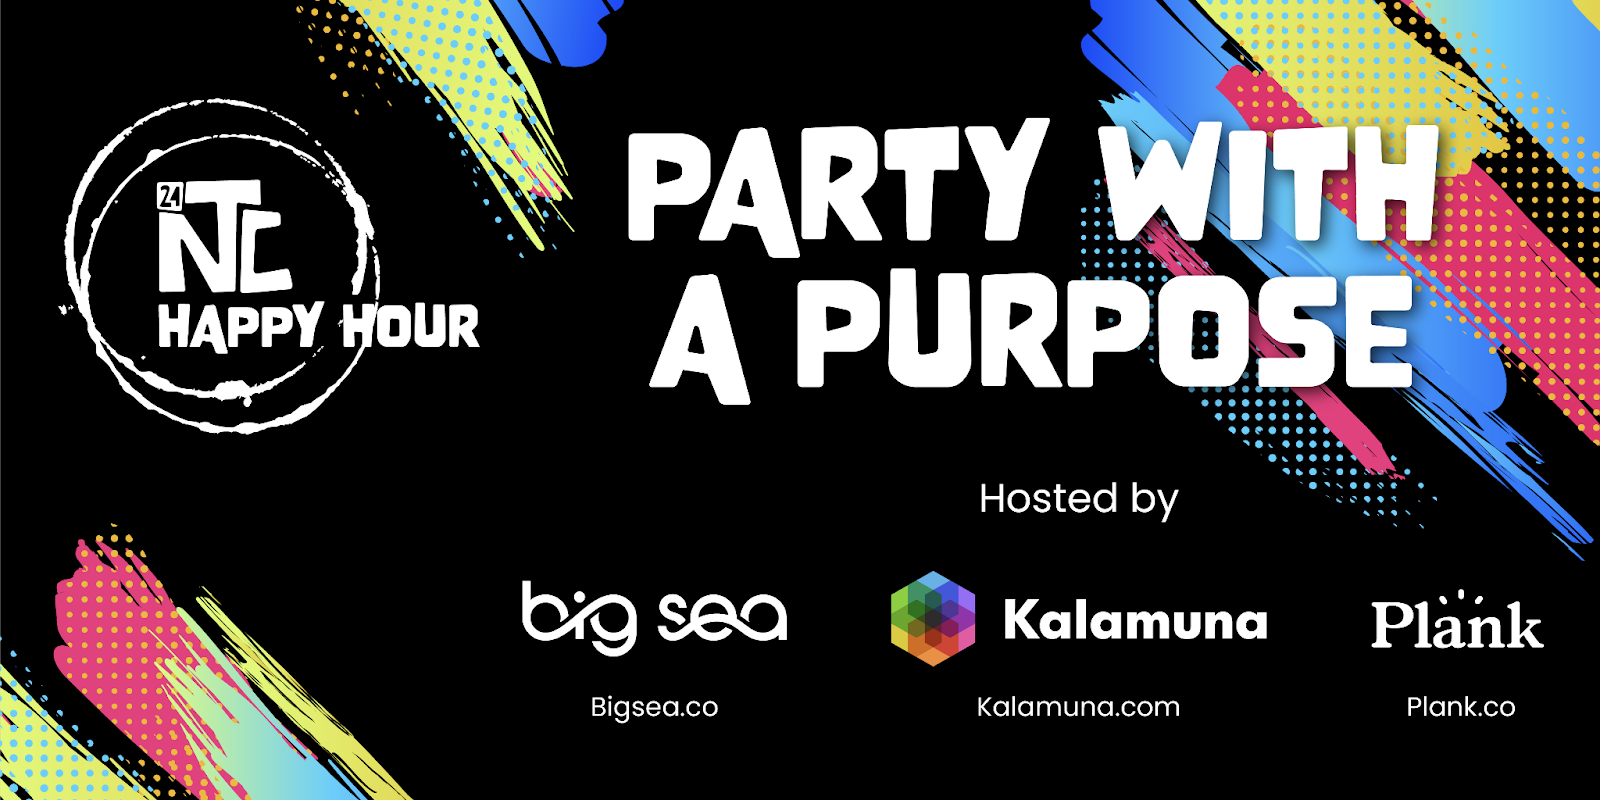 Party with a Purpose event poster for NTC Happy Hour with logos from co-host by Big Sea, Kalamuna, and Plank